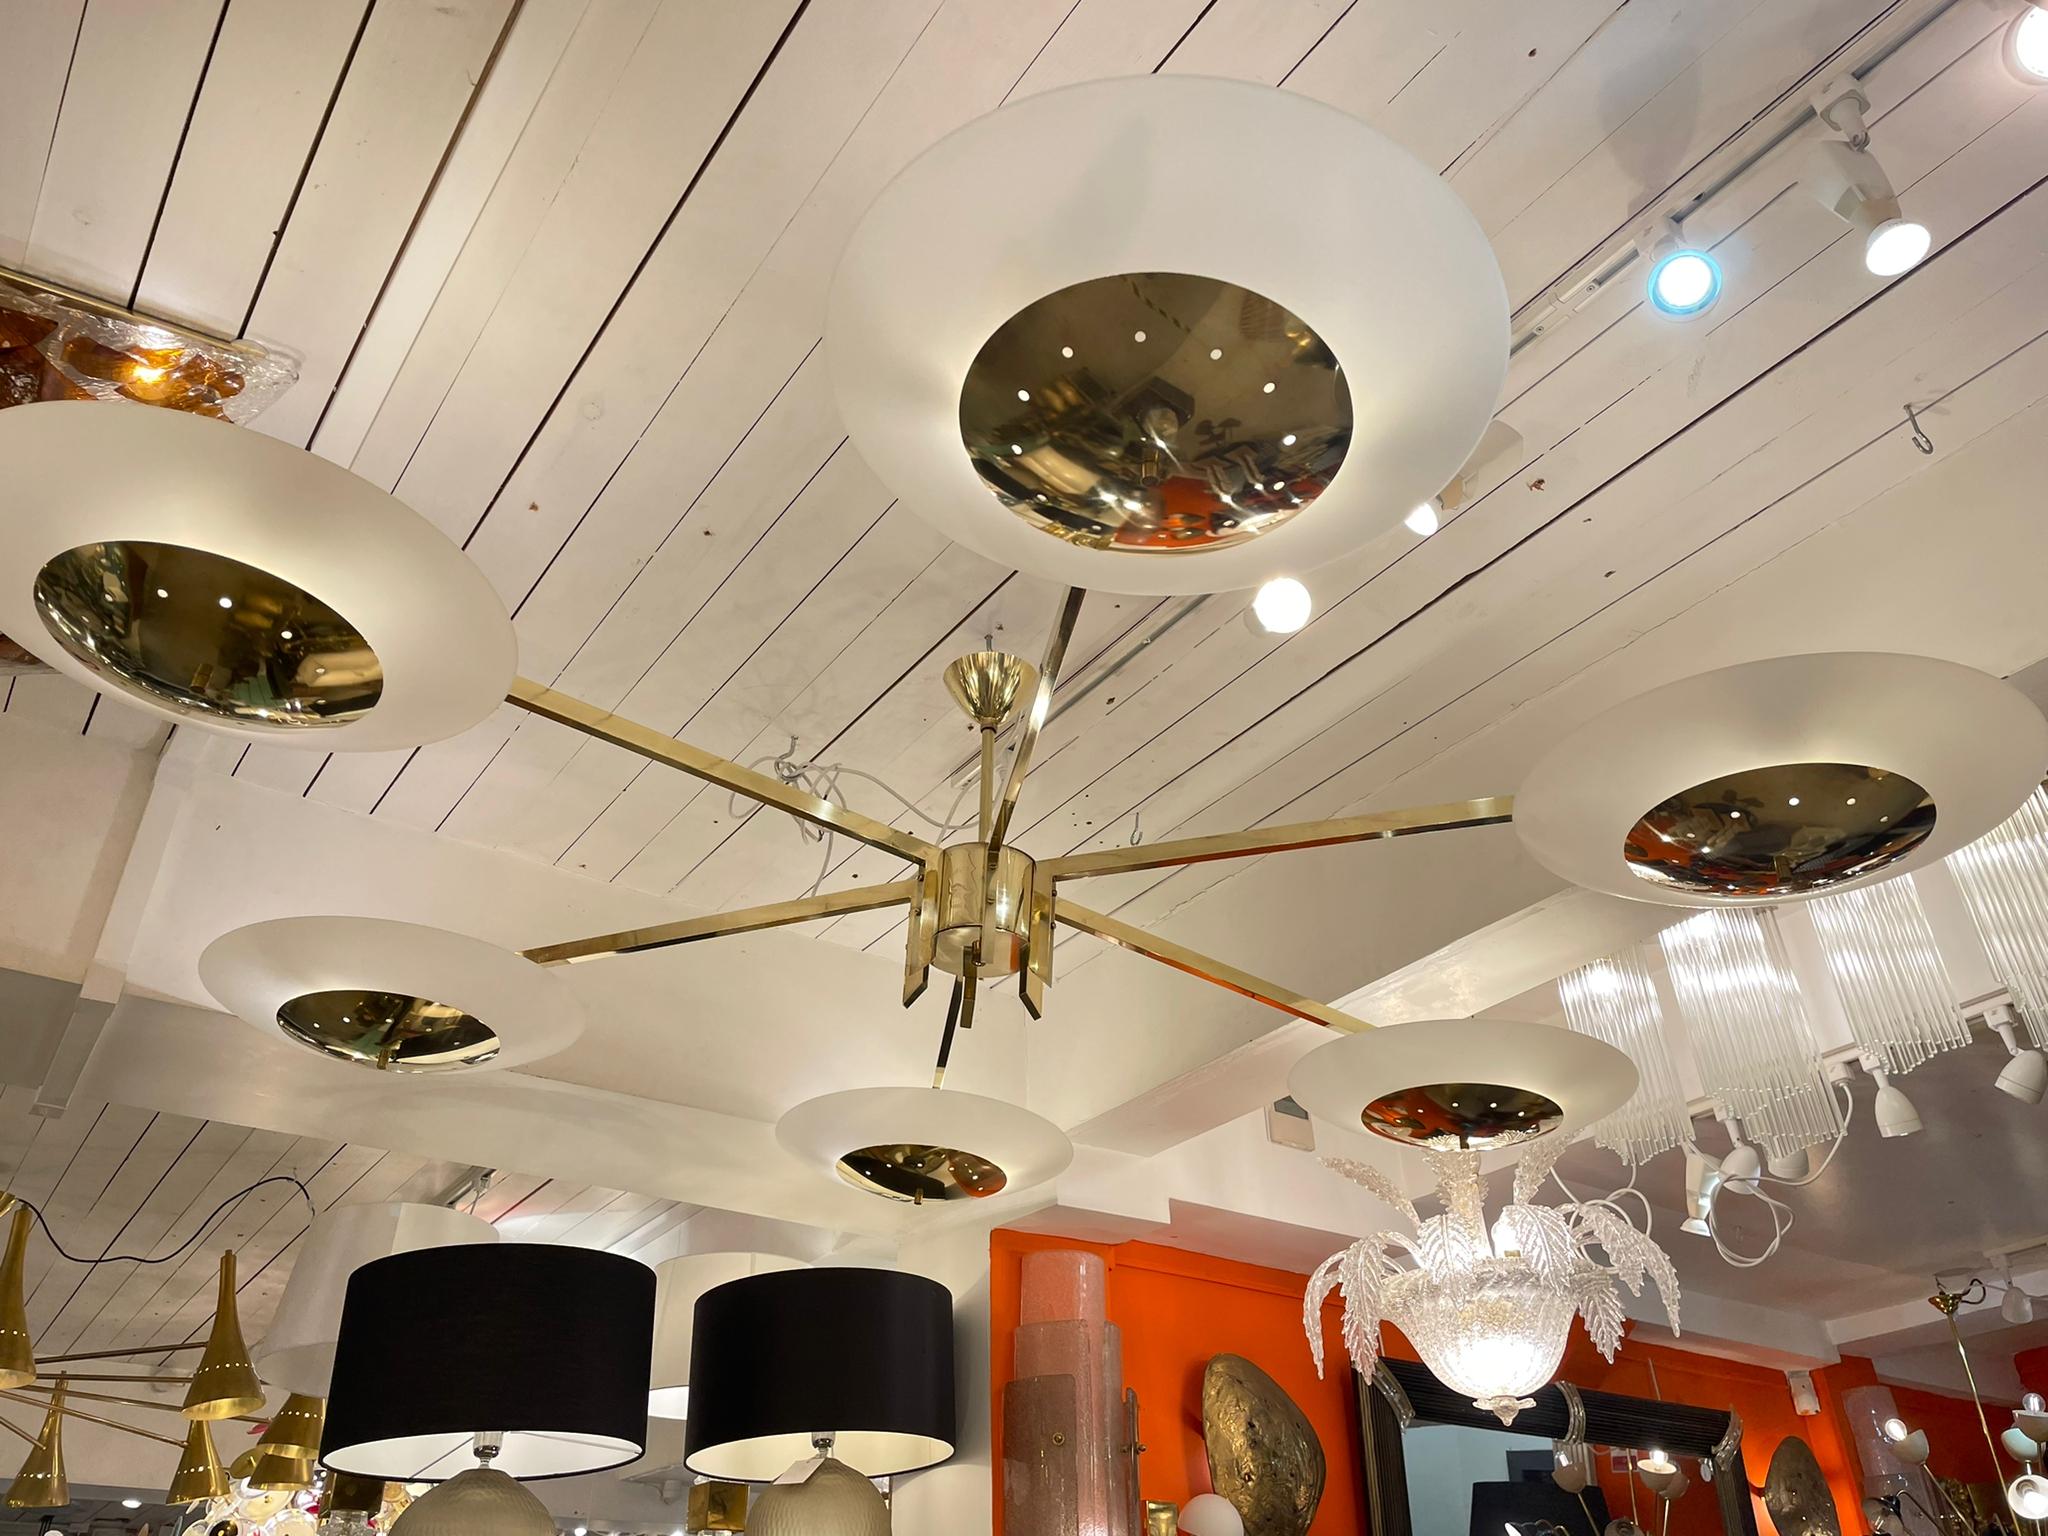 A stunning Italian Chandelier in Brass with 6 arms and white frosted shades. It is an amazing example of 1980s design.
This huge Italian Modernist chandelier chandelier has a brass structure with six arms terminating in large frosted glass and brass